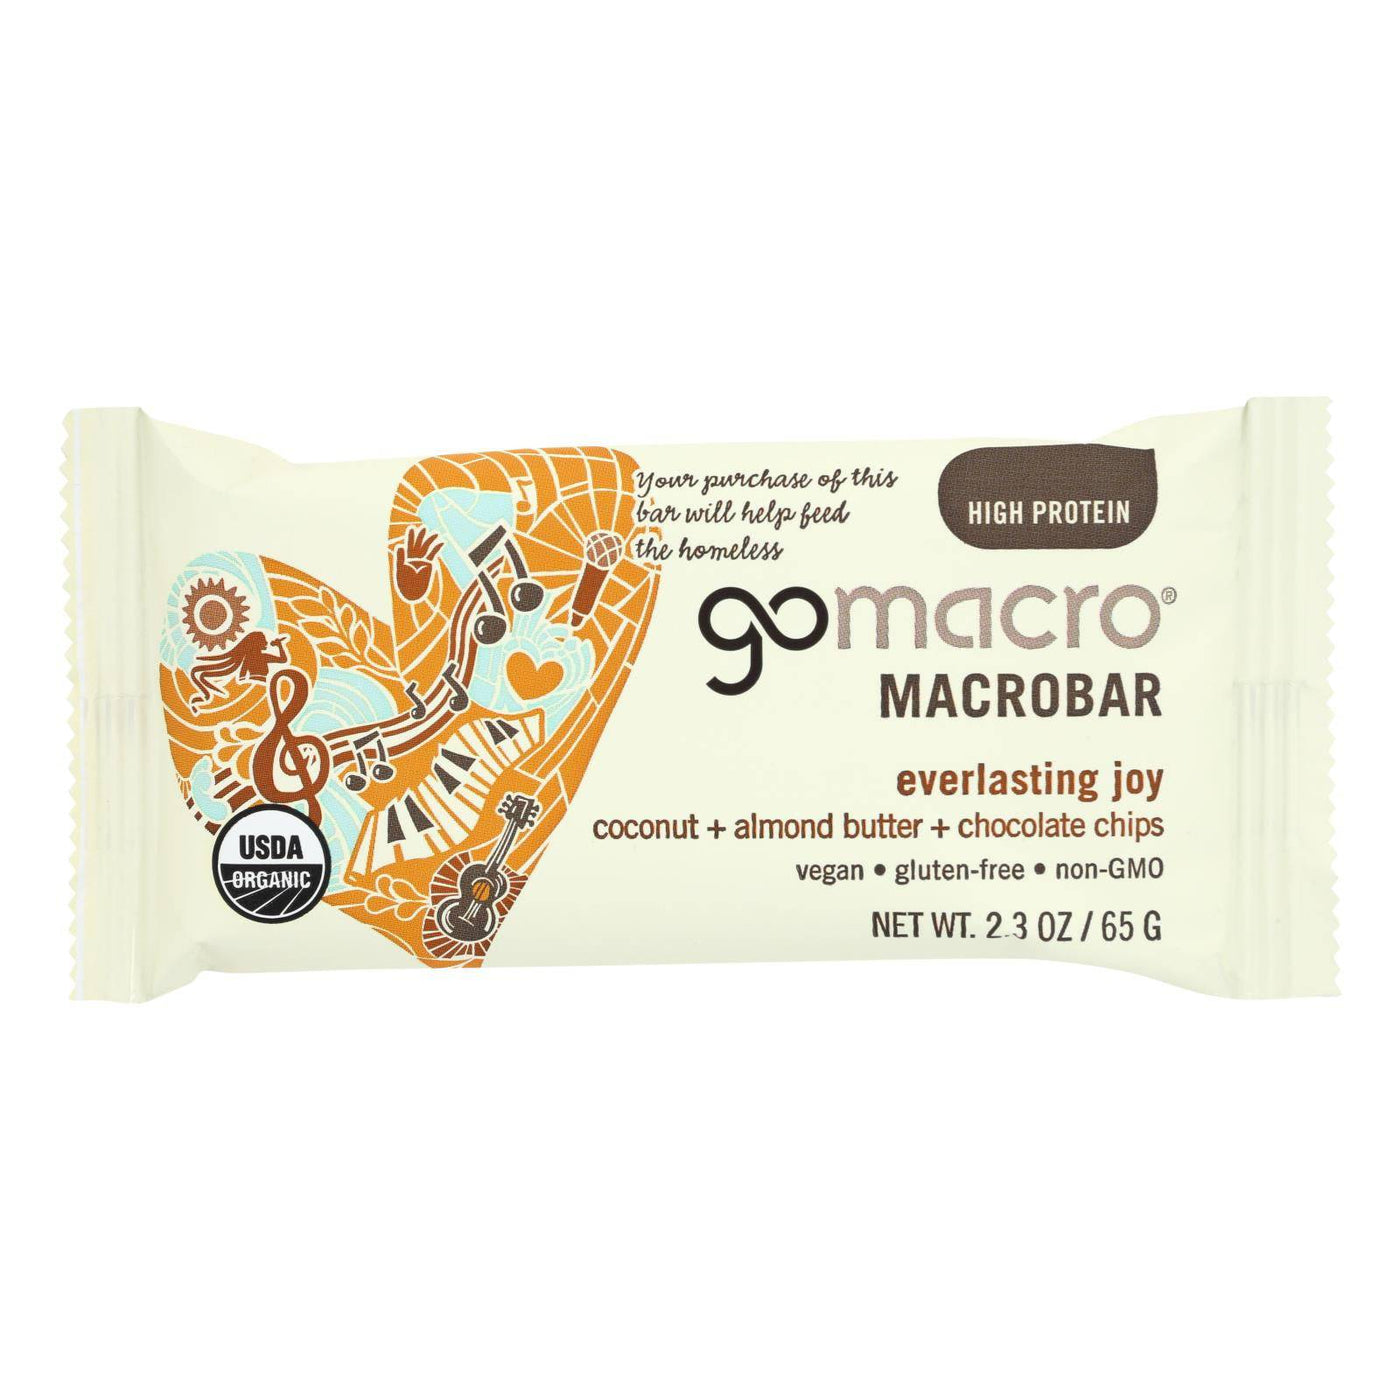 Gomacro Organic Macrobar - Coconut Almond Butter And Chocolate Chips - Case Of 12 - 2.3 Oz. | OnlyNaturals.us